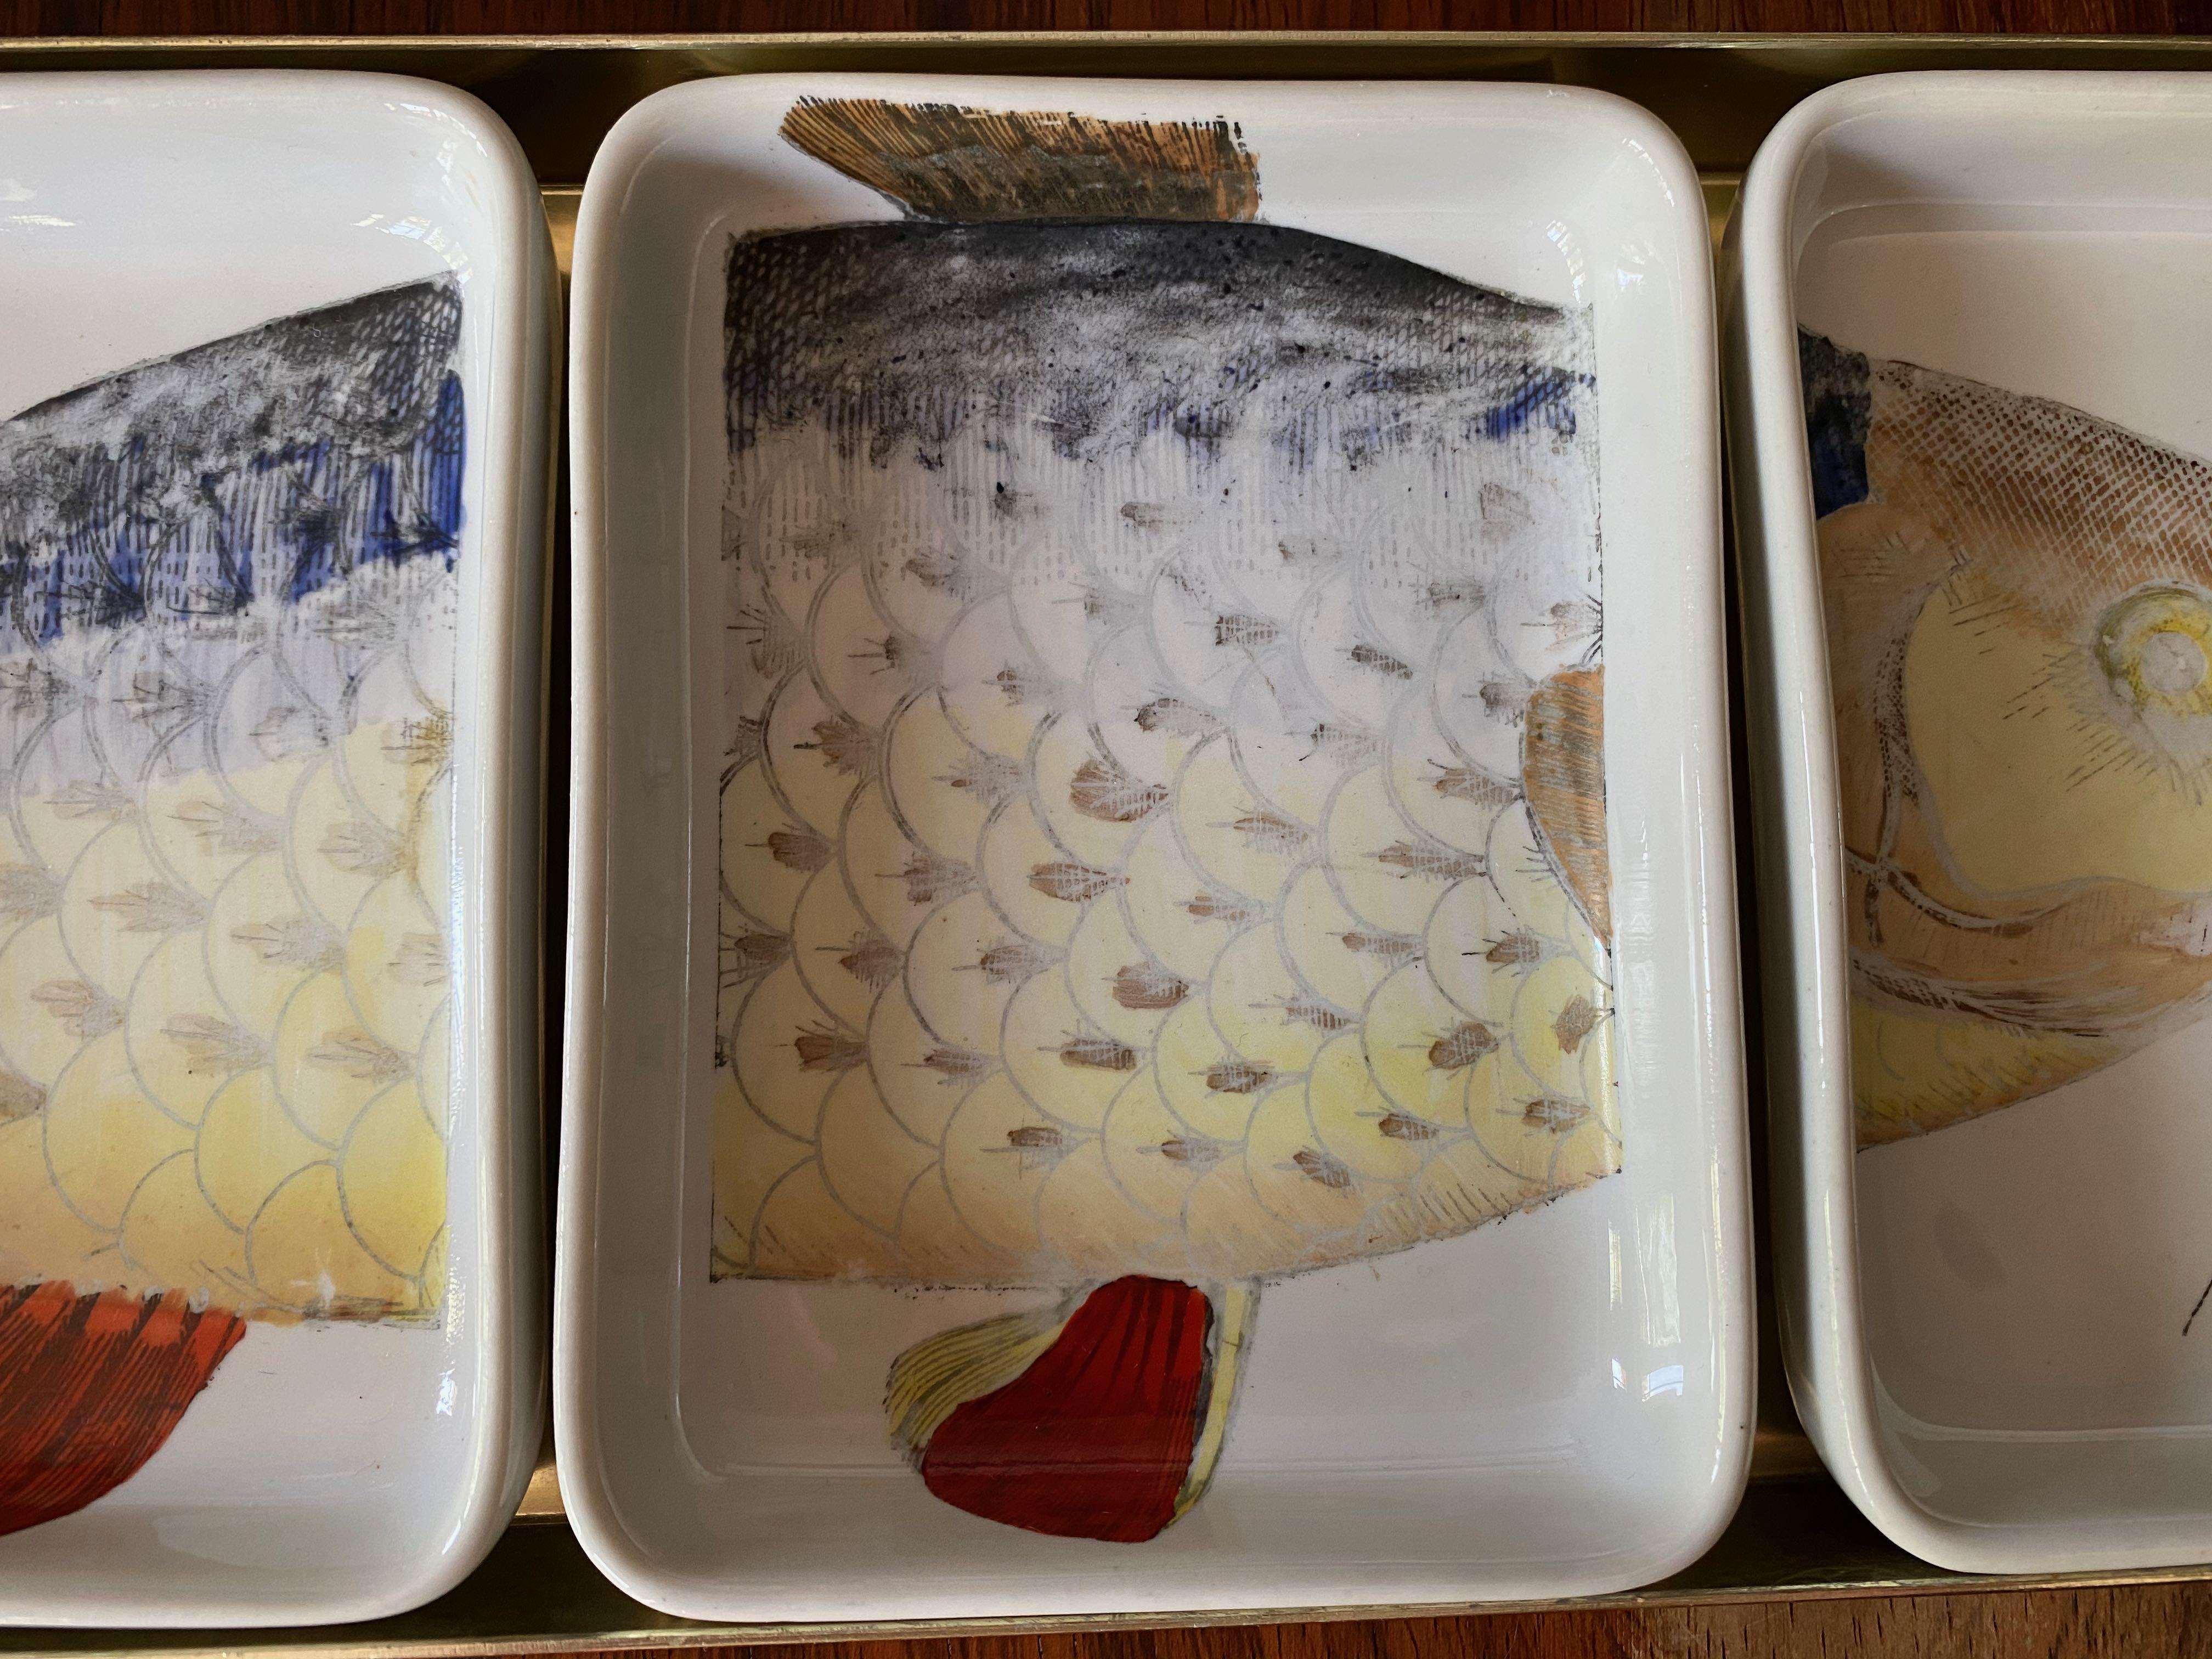 Italian Rare 1960s Fish Pesci Appetizer or Hors D'oeuvre Tray by Piero Fornasetti For Sale